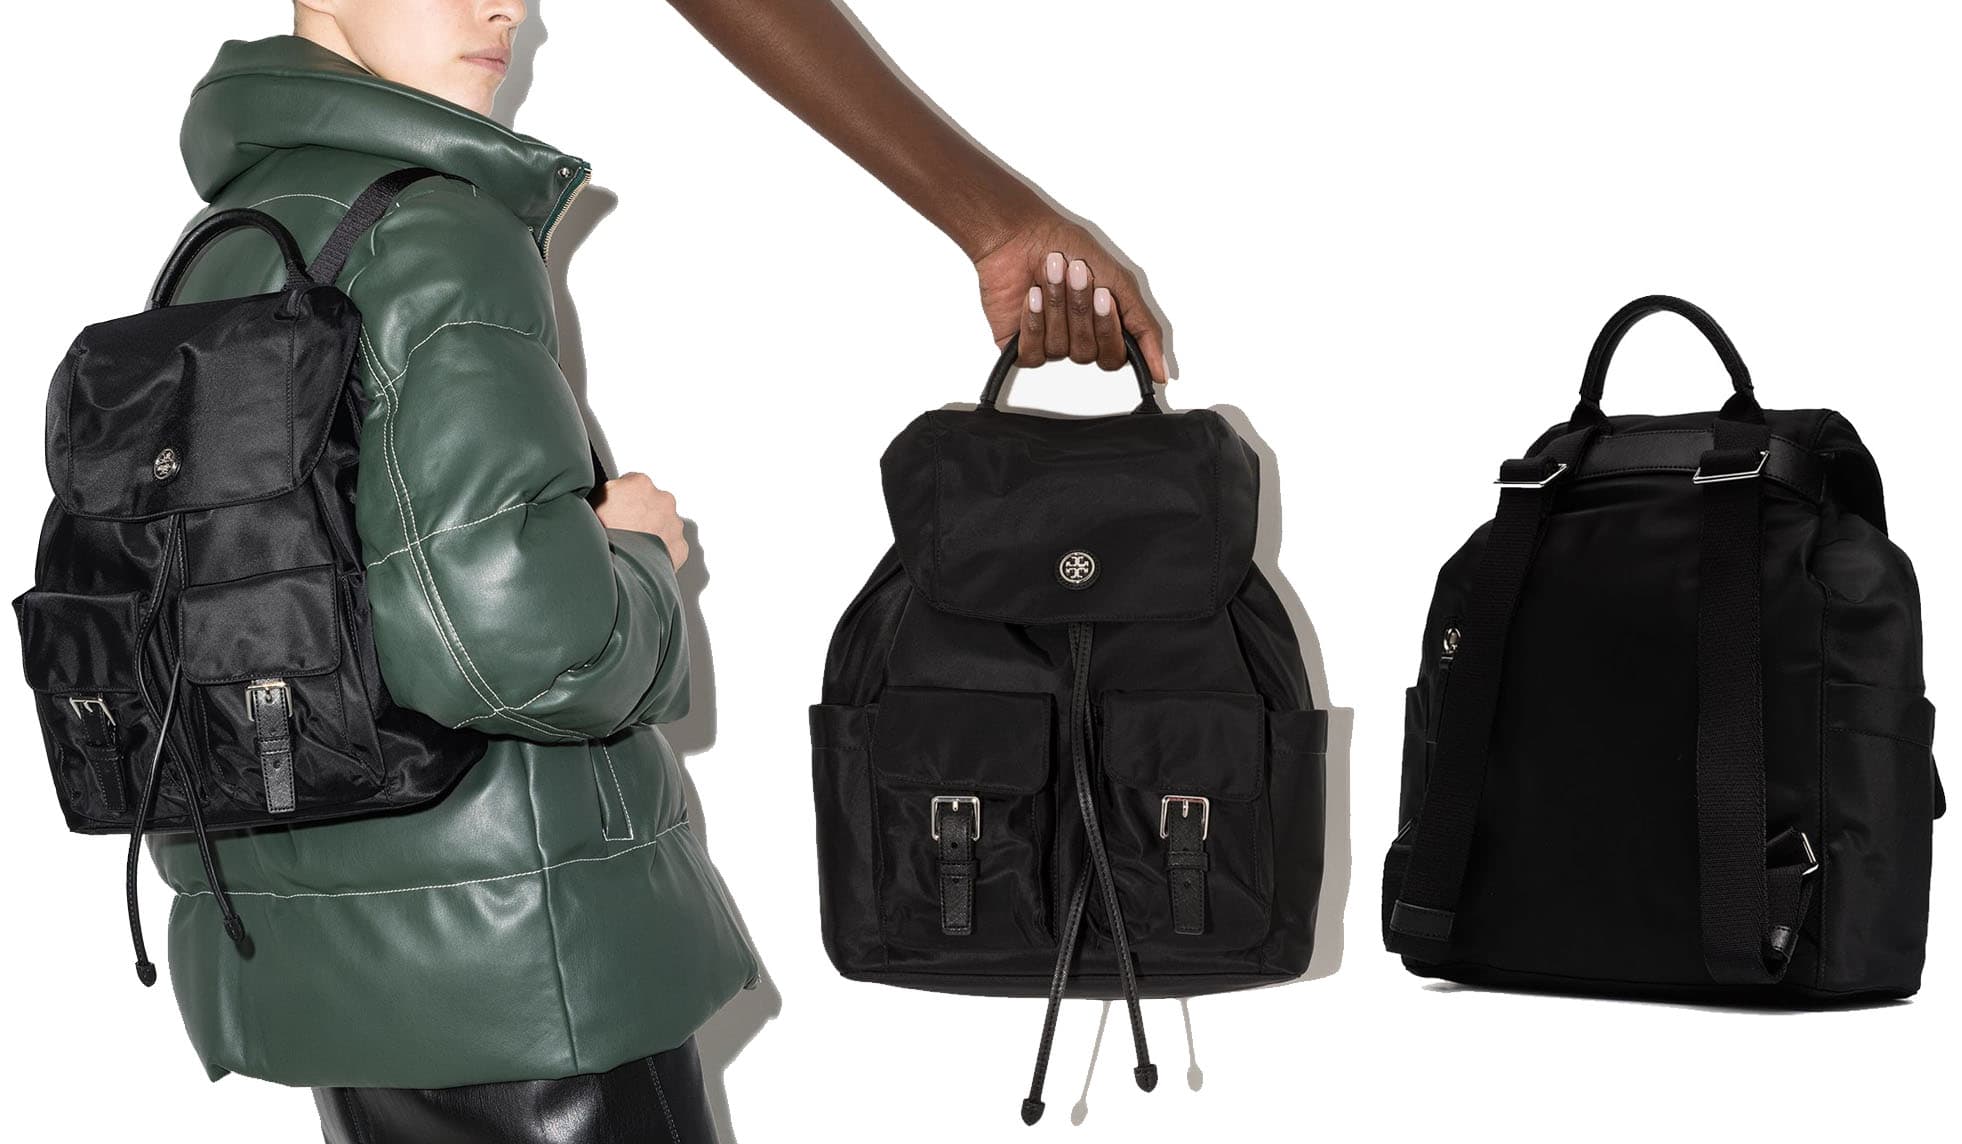 Revisiting the '90s practical backpack designs, this Tory Burch nylon backpack features a multi-pocket construction with a drawstring fold-over top, two front pouch pockets, and the designer's double-T plaque